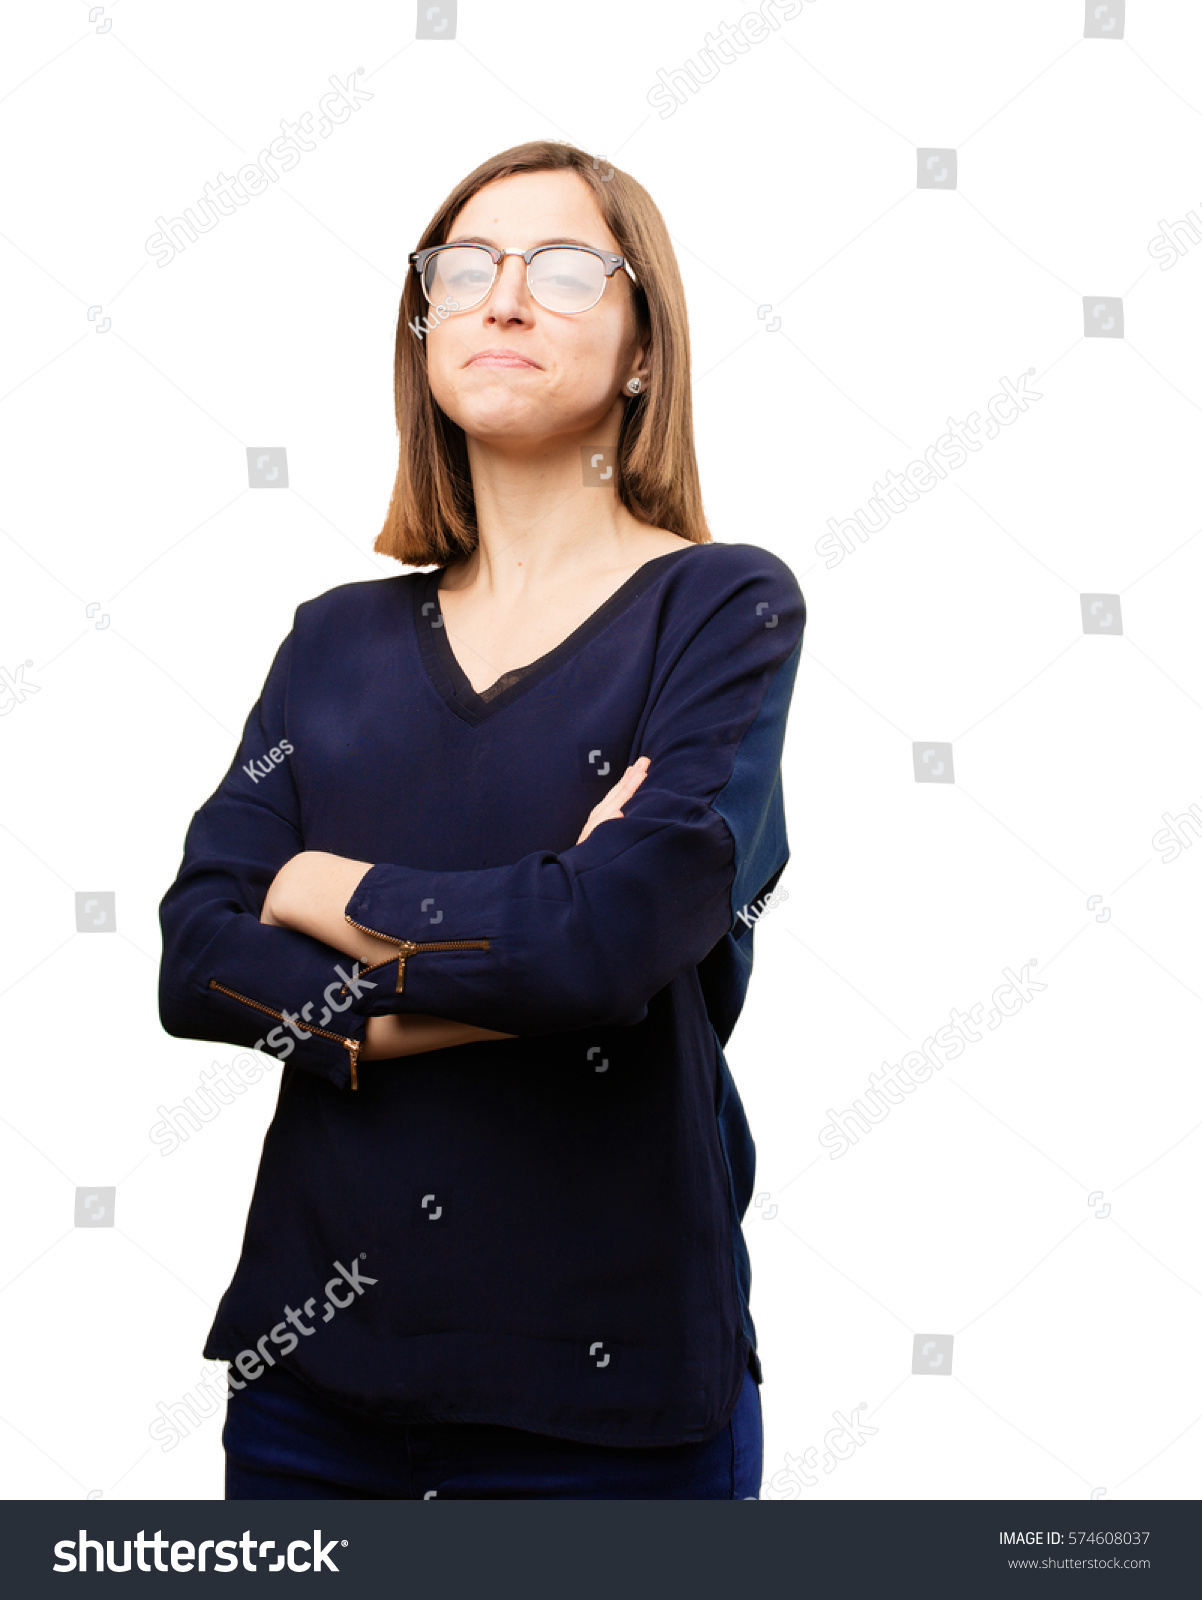 young pretty woman with glasses #574608037